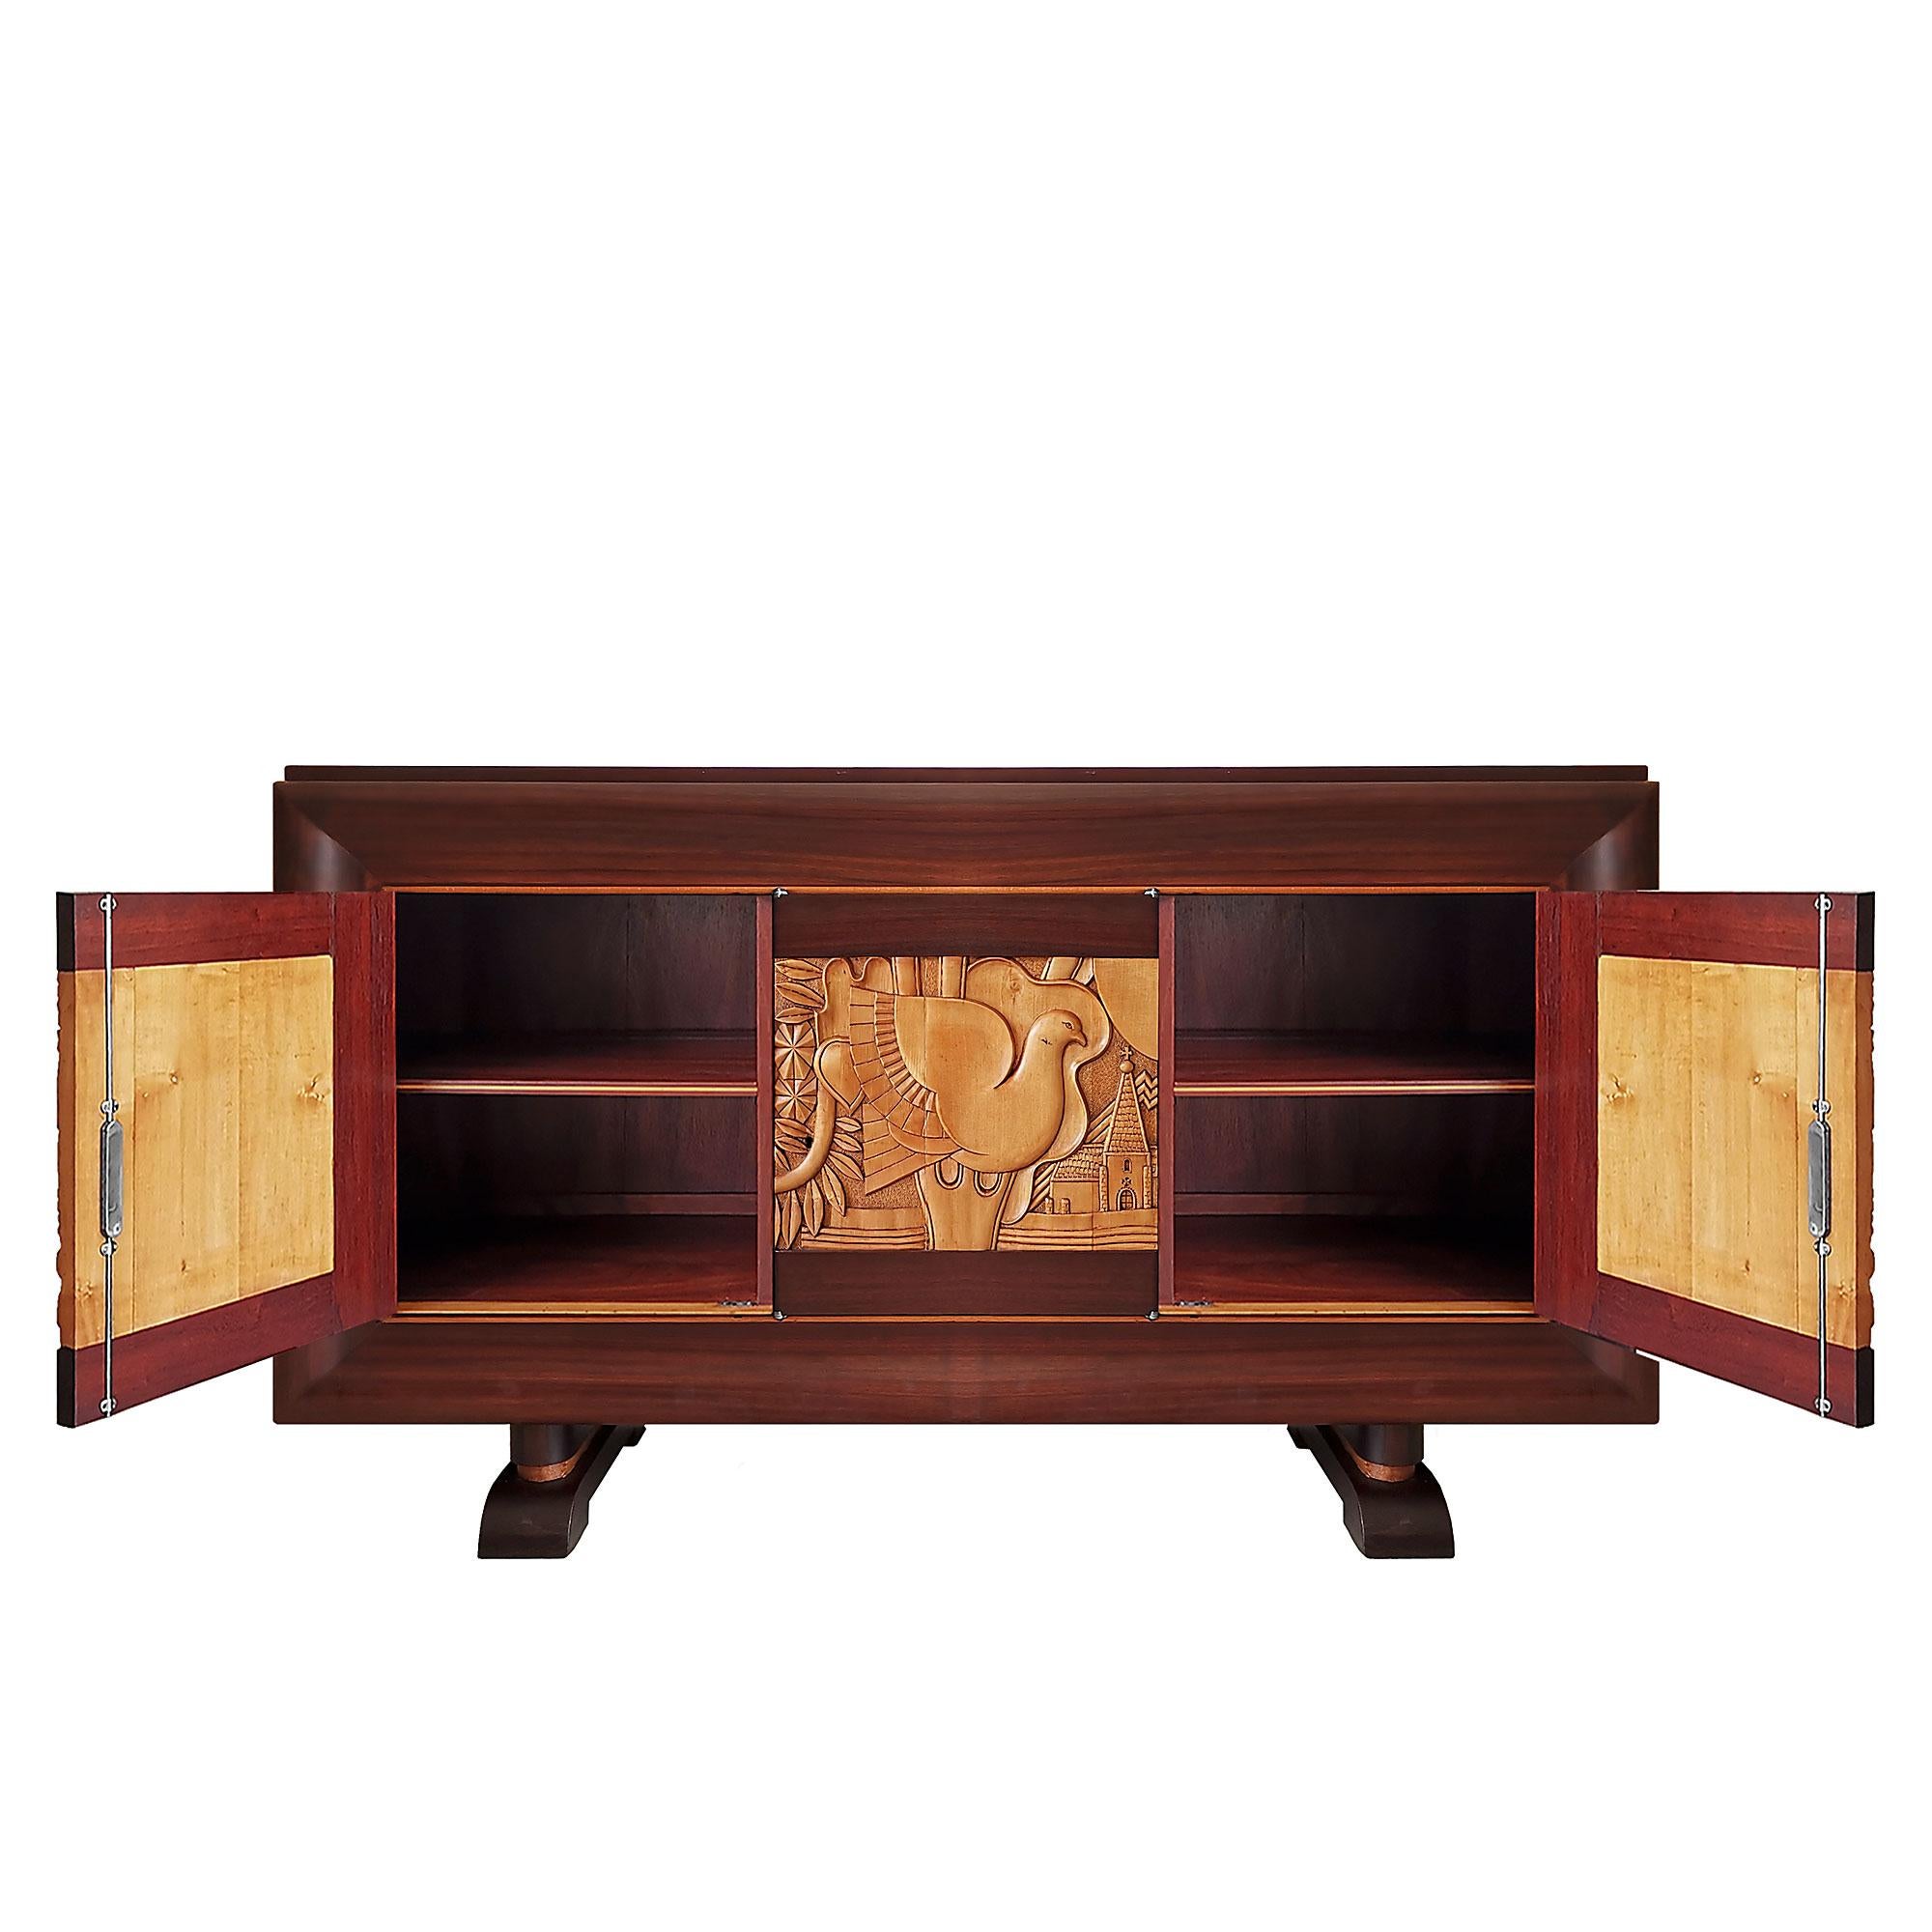 Mid-20th Century 1940's Sideboard with Three Doors, Bubinga Wood, Carved Maple, Bronze, France